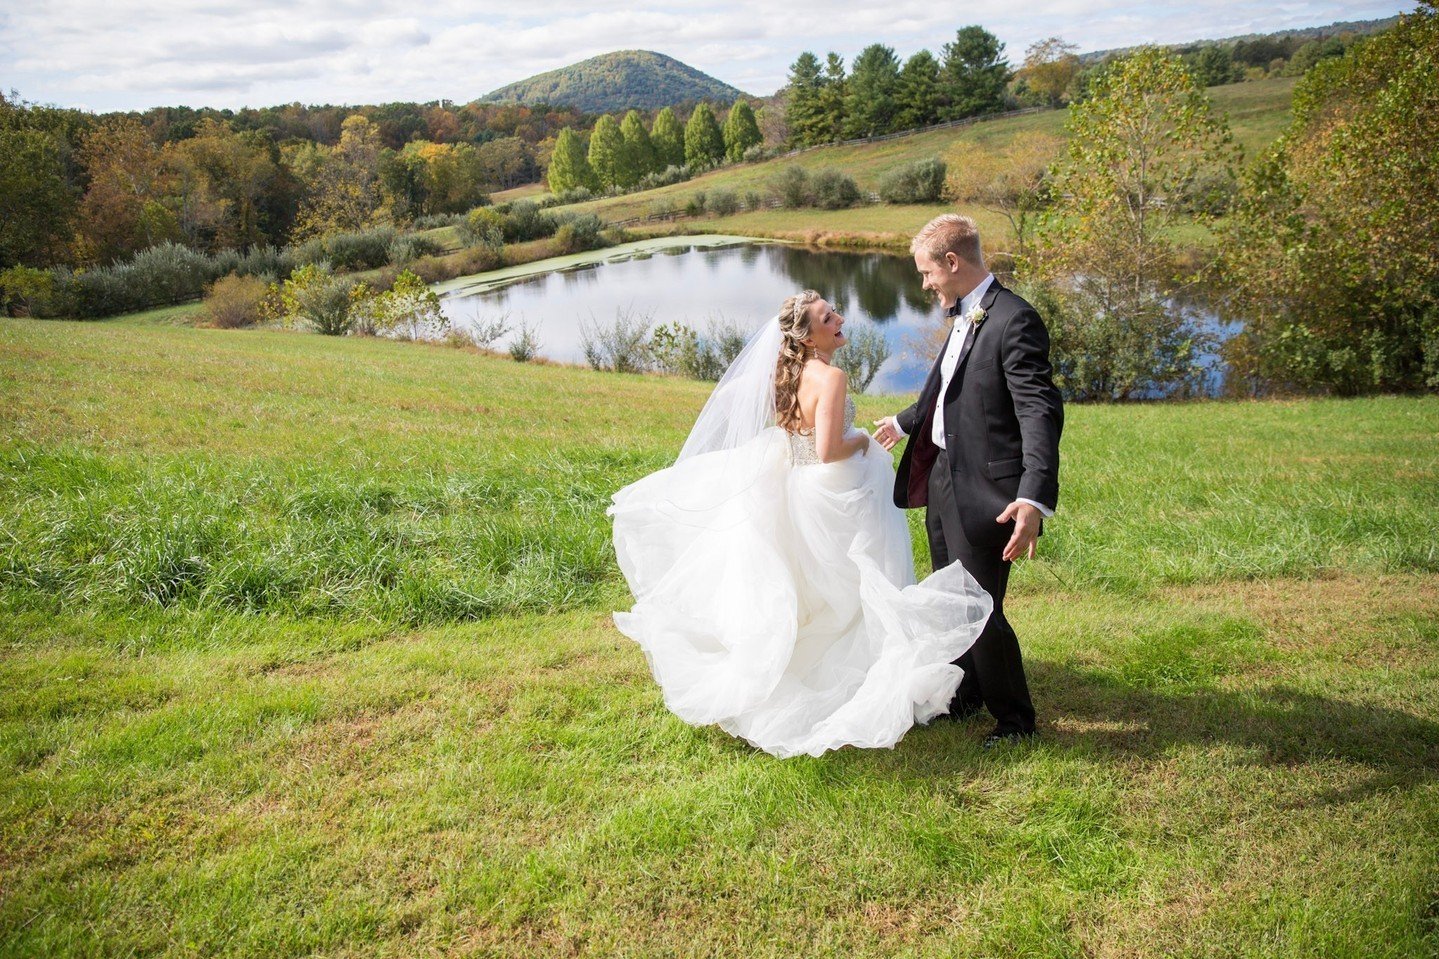 Romance at the Meadows at Castleton. Our breathtaking property is perfect for your very special day.⁠
⁠
www.castletonmeadows.com